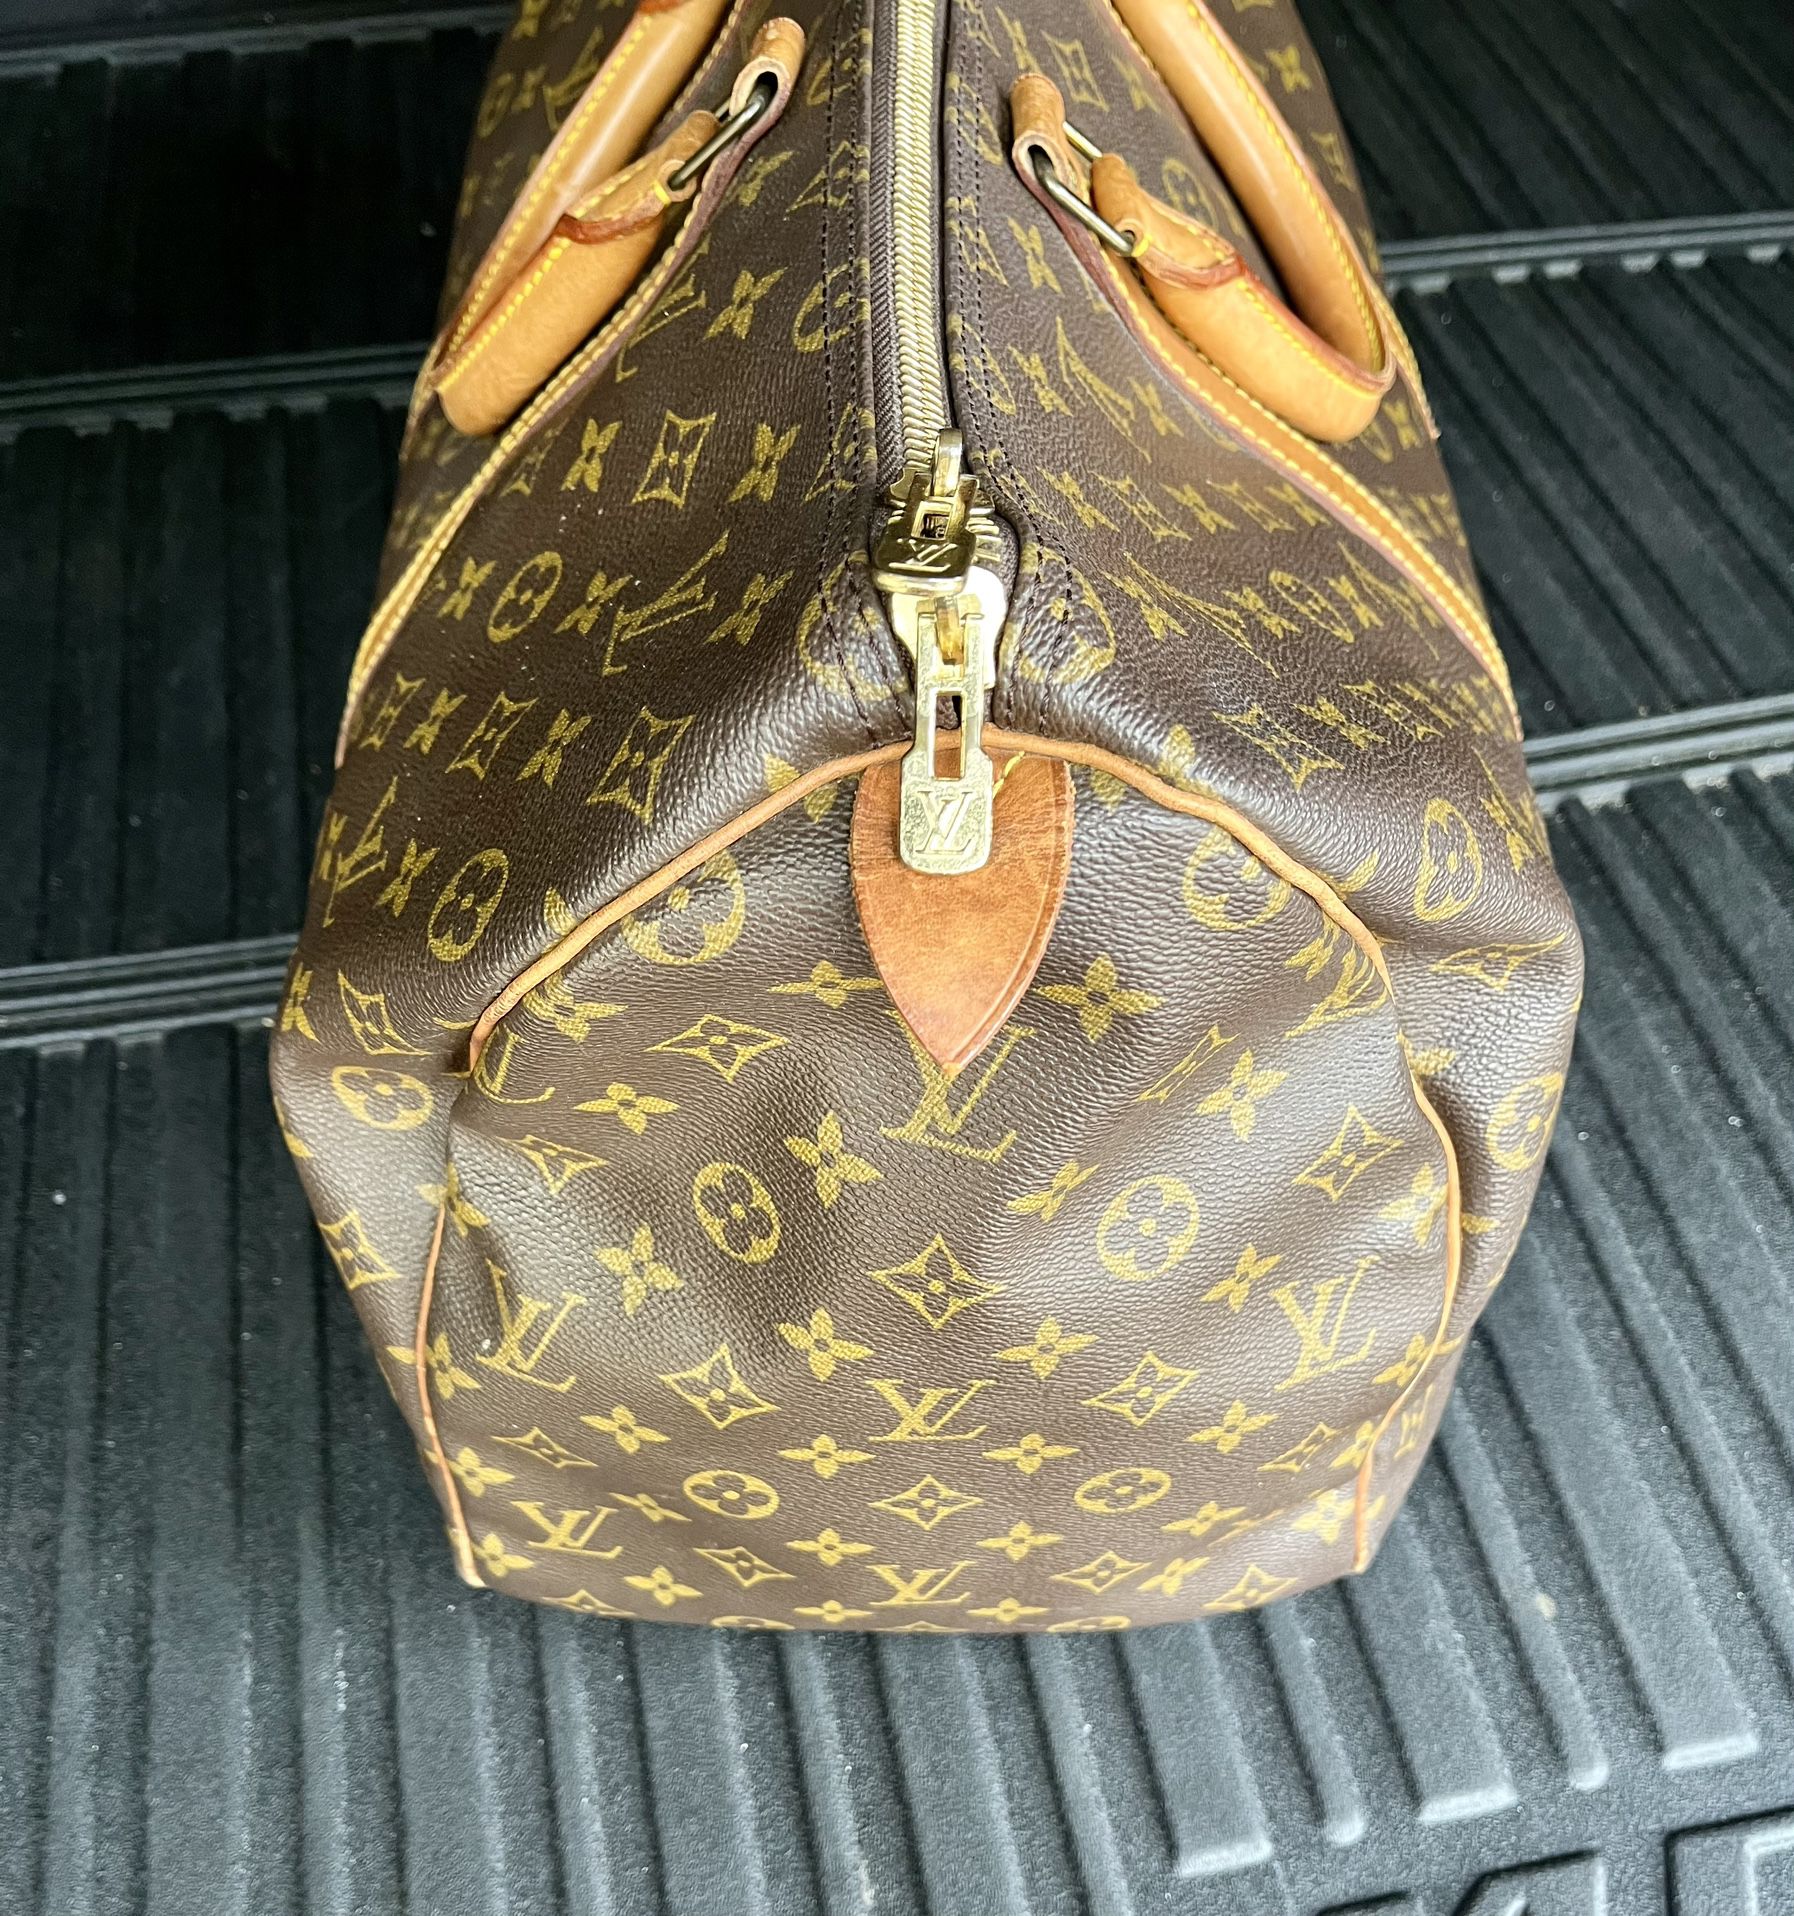 Vintage Louis Vuitton Keep all size 50 for Sale in Columbia, MD